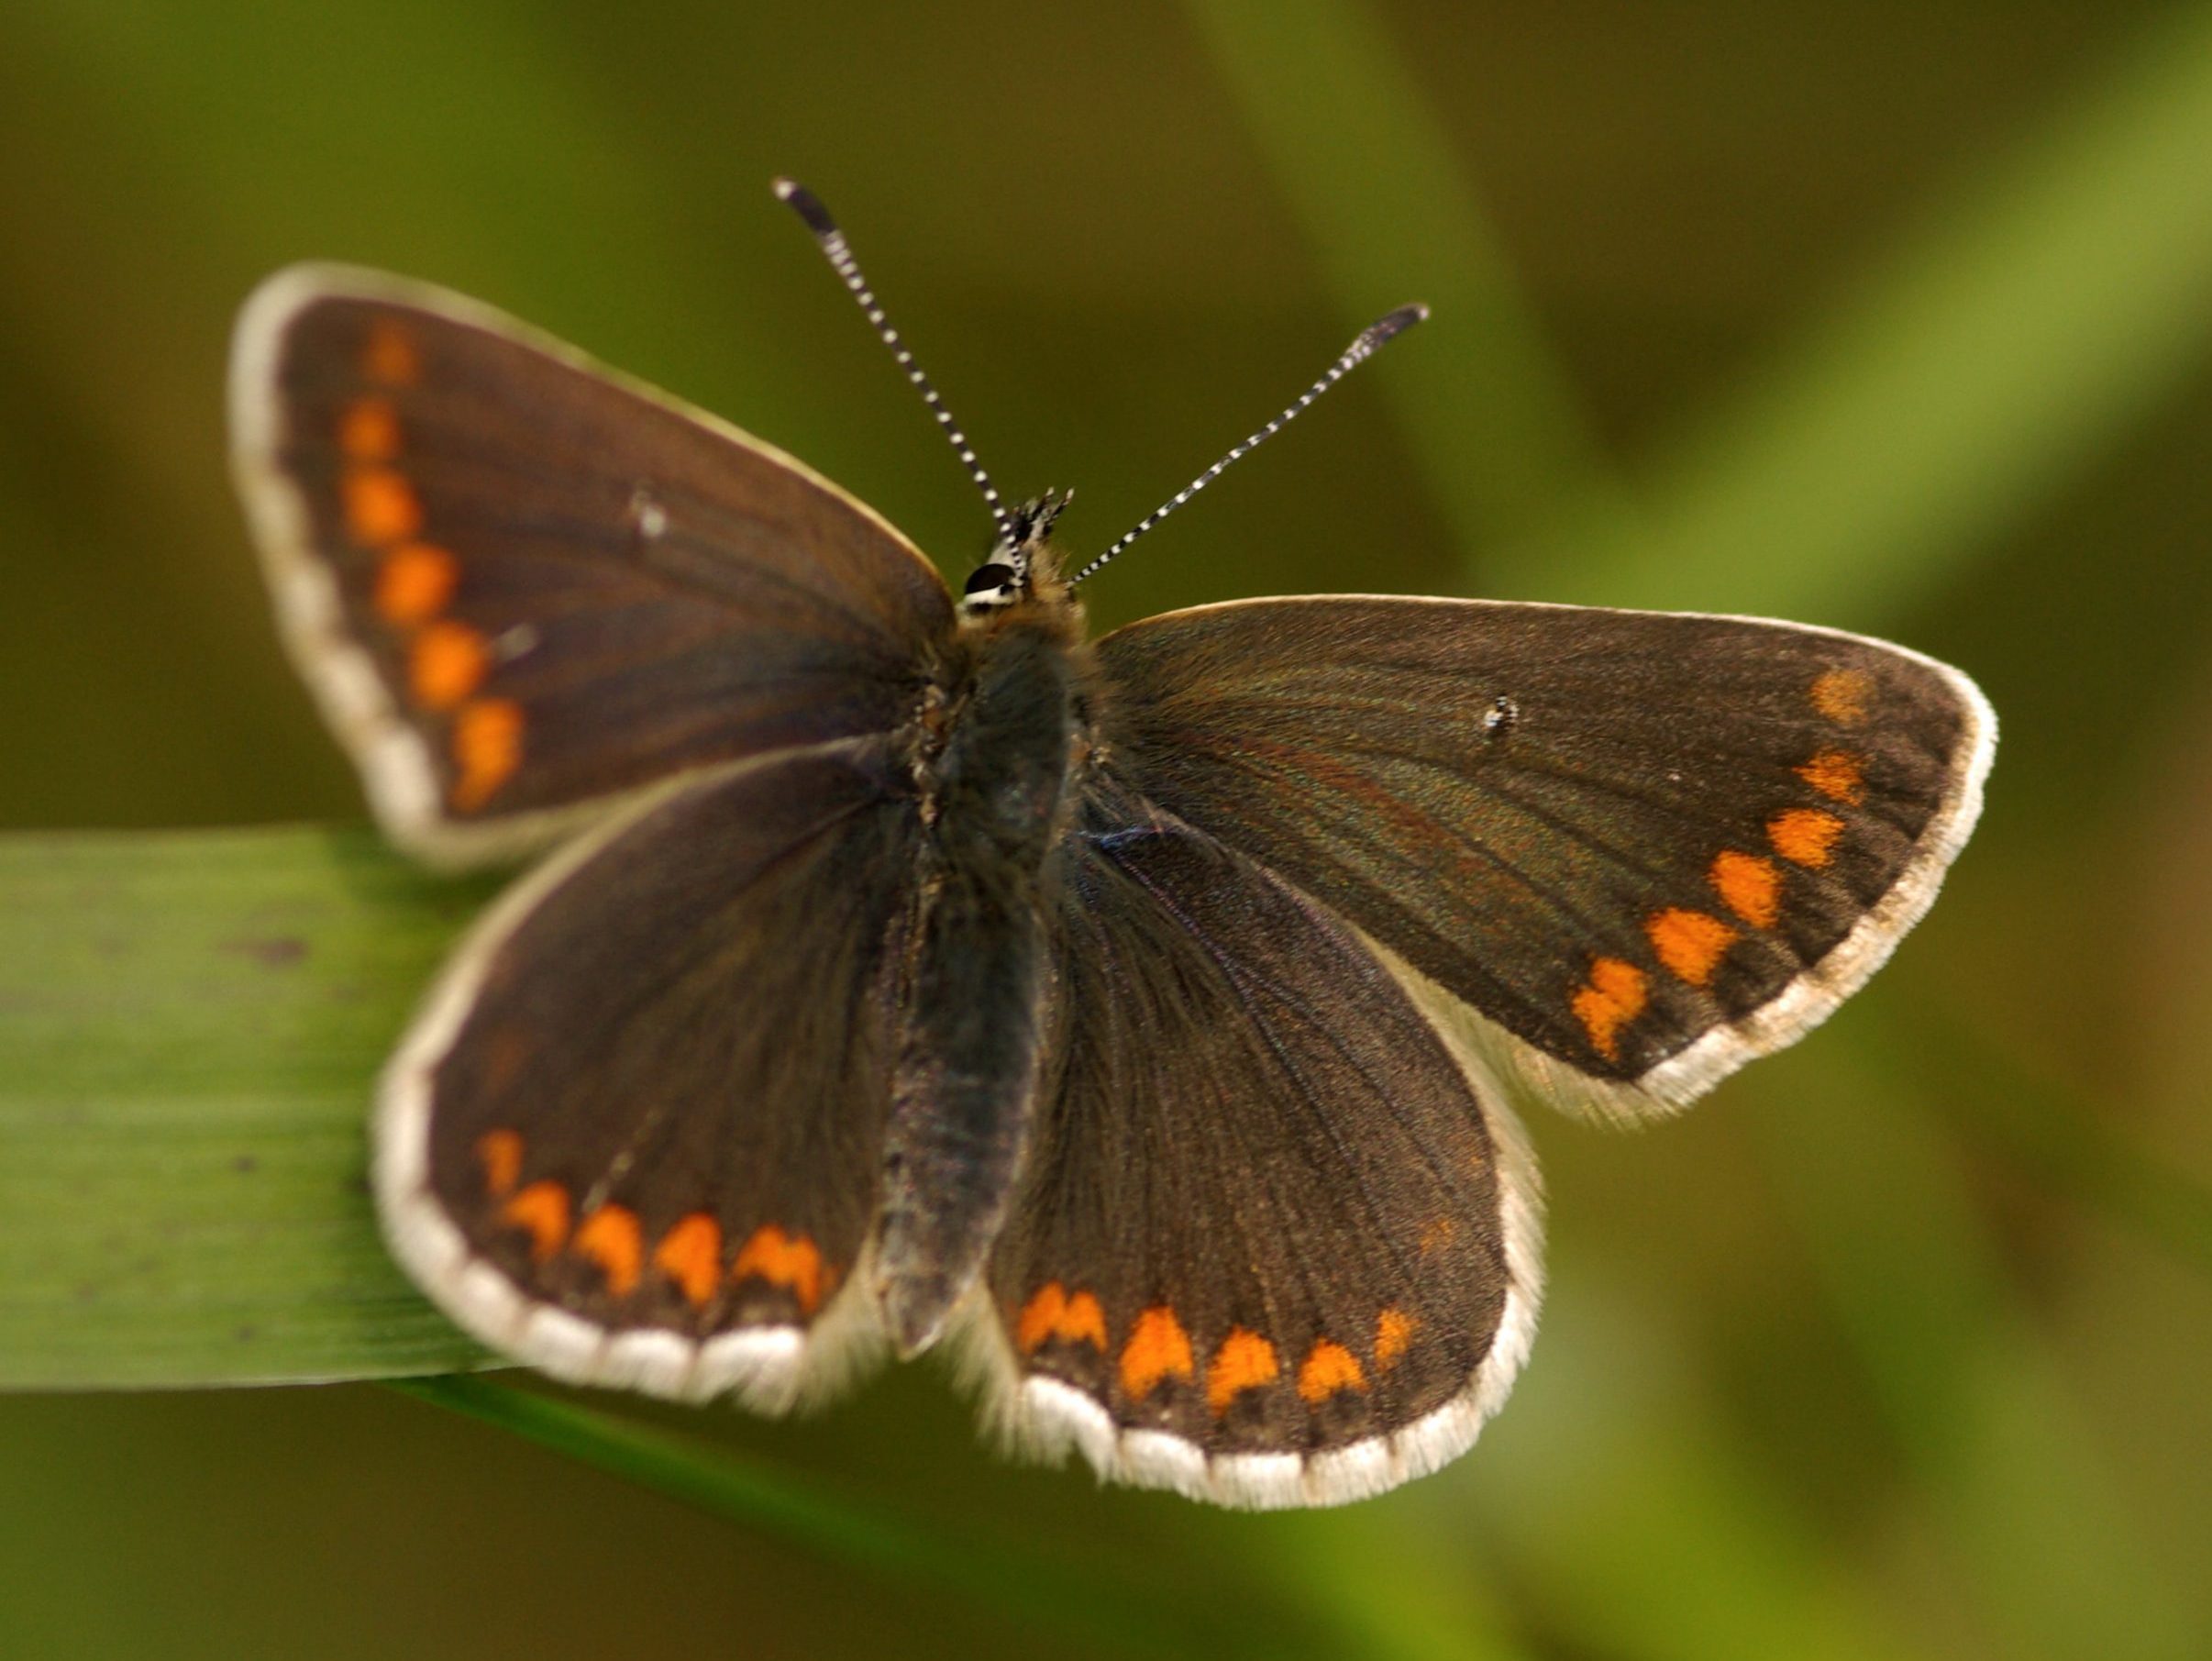 Northern Brown Argus butterfly